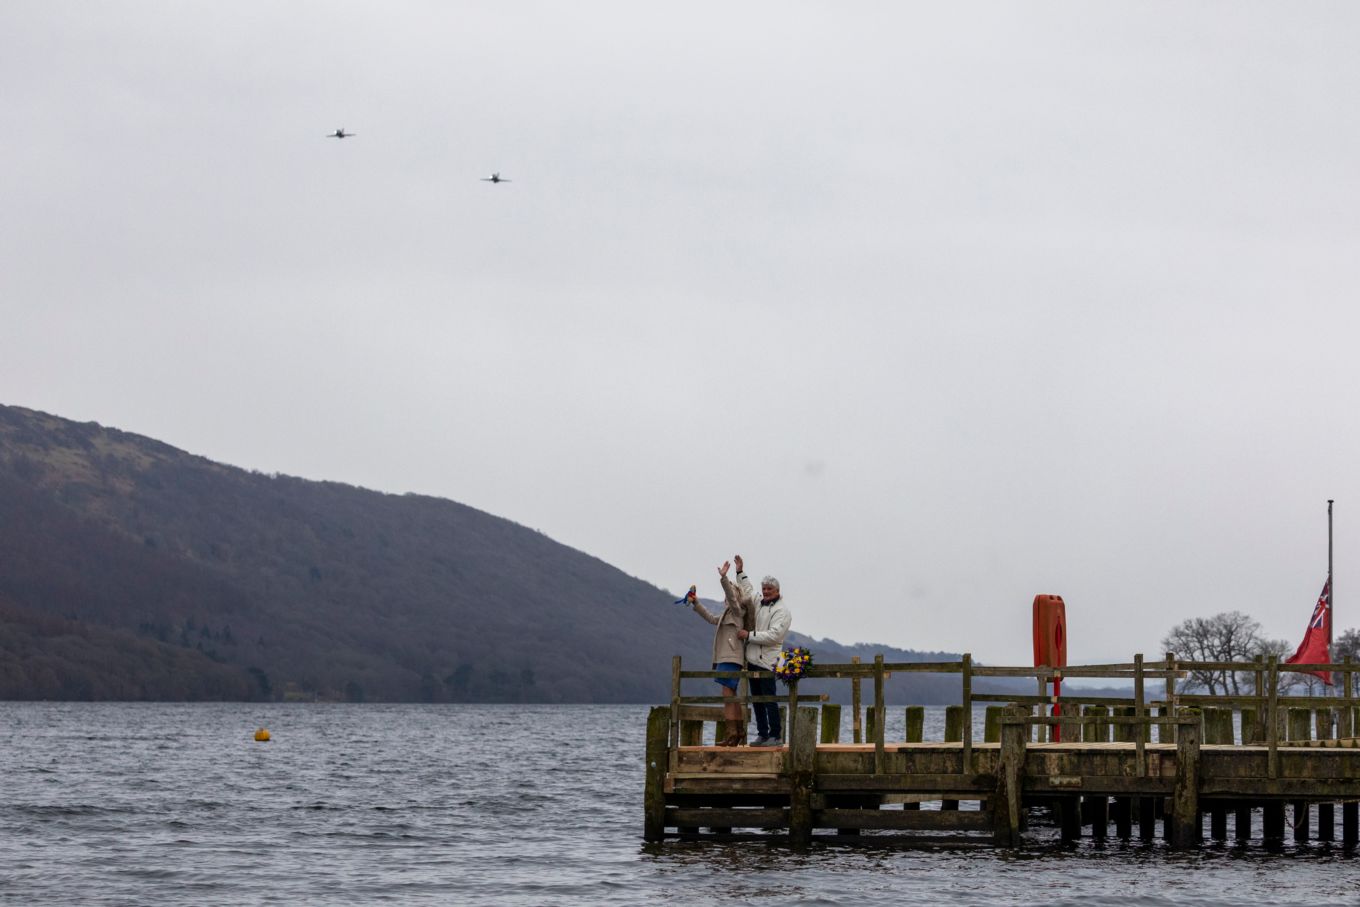 Image shows two RAF Hawk T2 aircraft flying over Coniston Water.